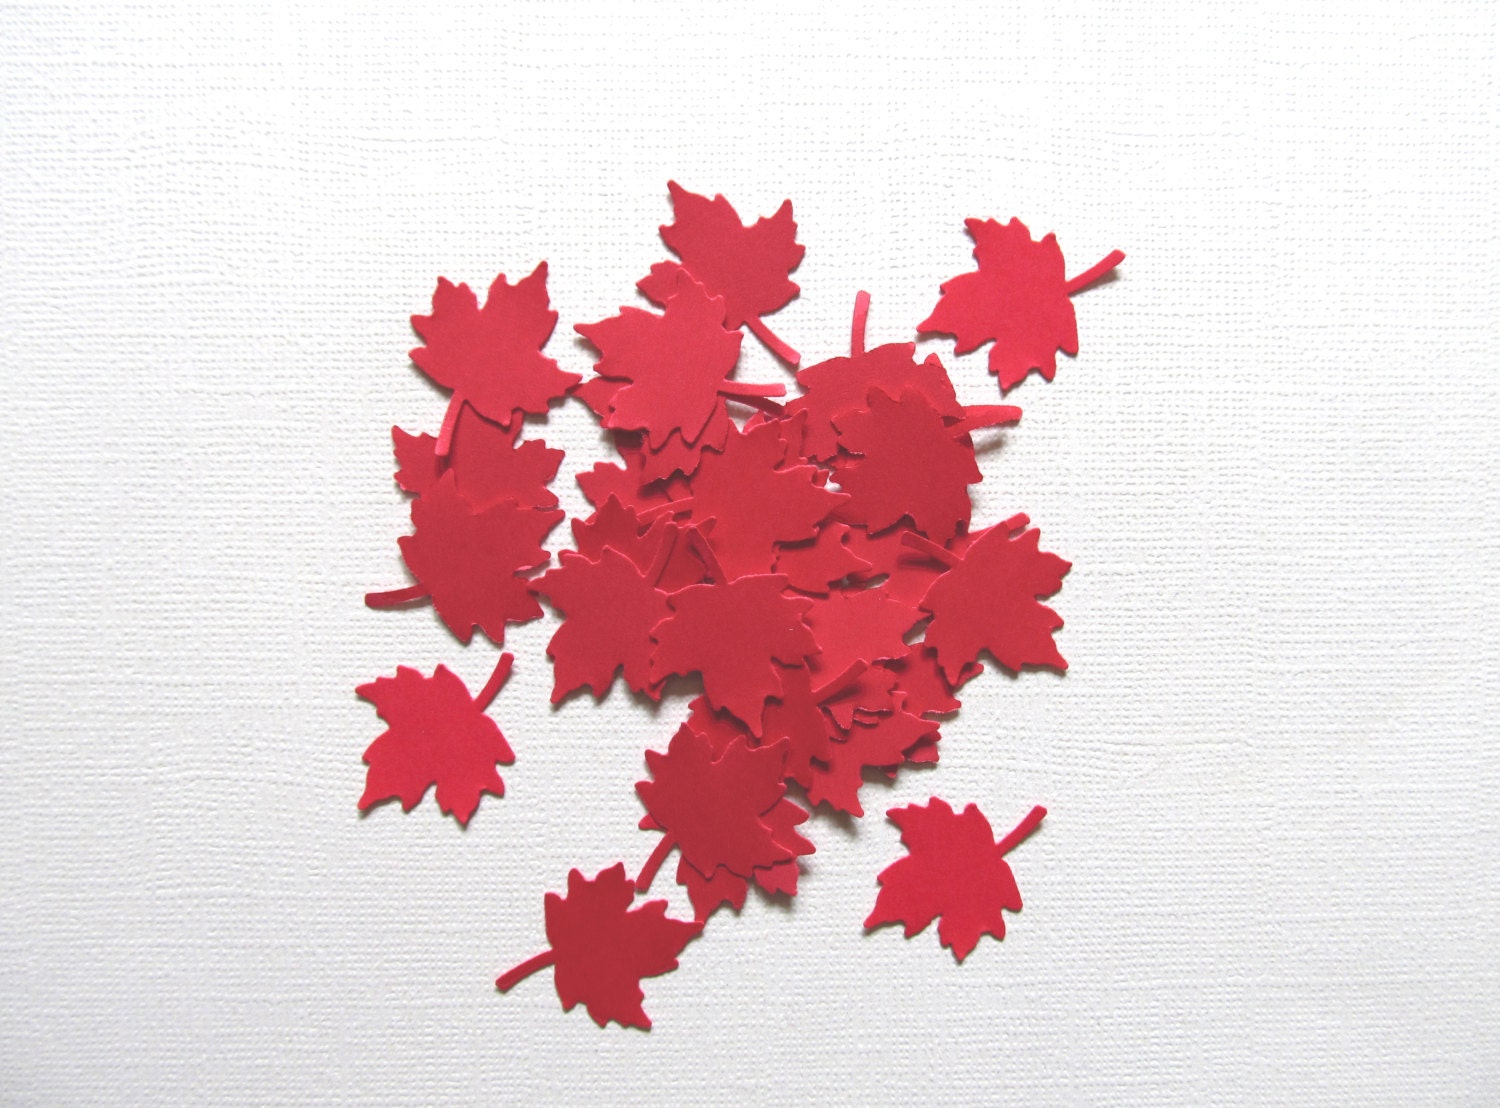 100 Red Maple Leaves, Party Decor, Confetti, Canada, Weddings, Showers, Holidays, Thanksgiving - CatchSomeRaes